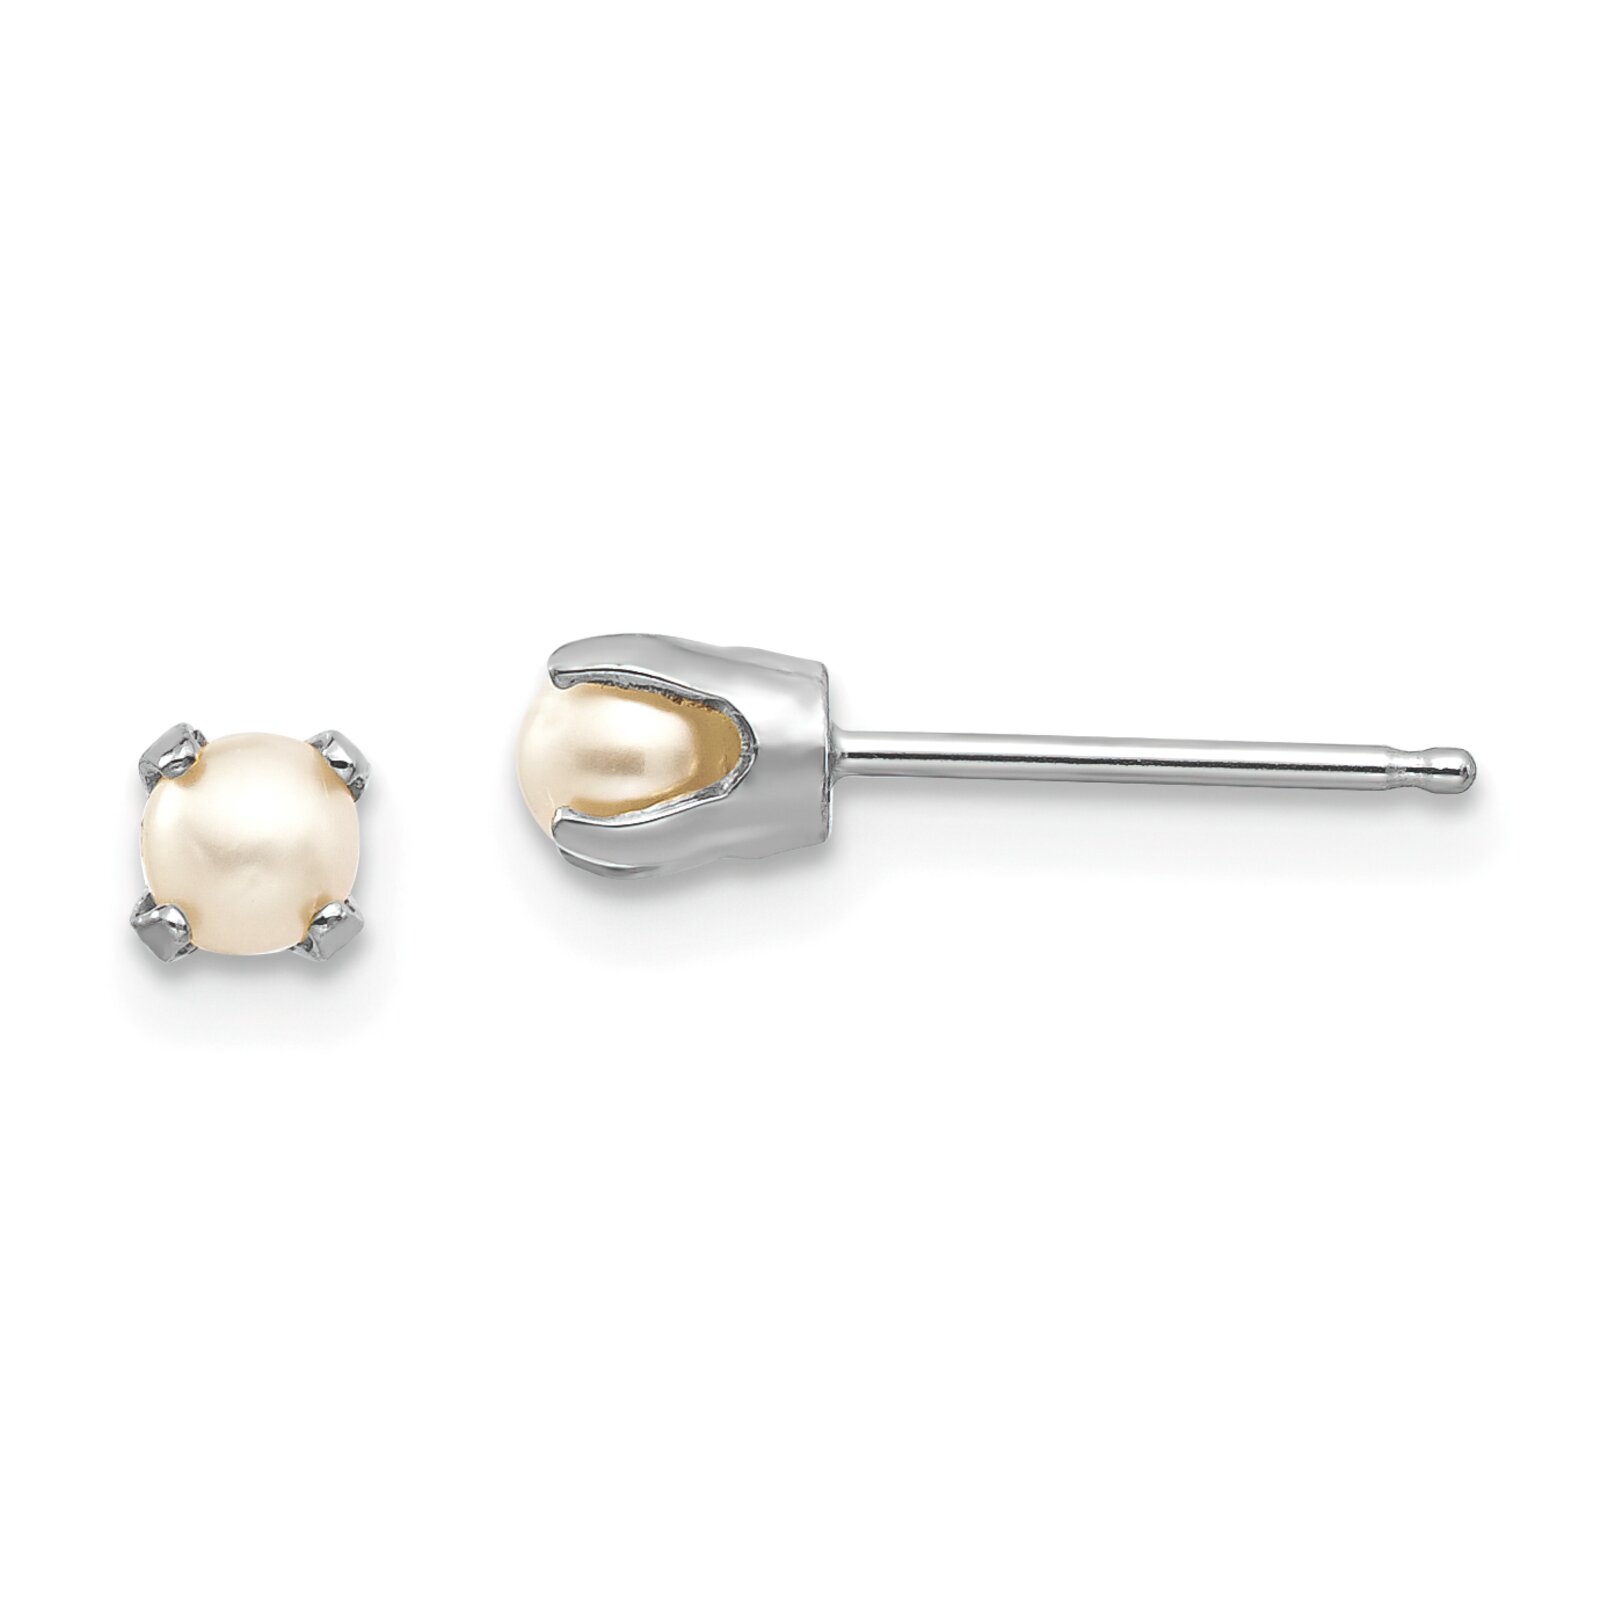 Findingking 14K White Gold Cultured Pearl Stud Earrings Jewelry